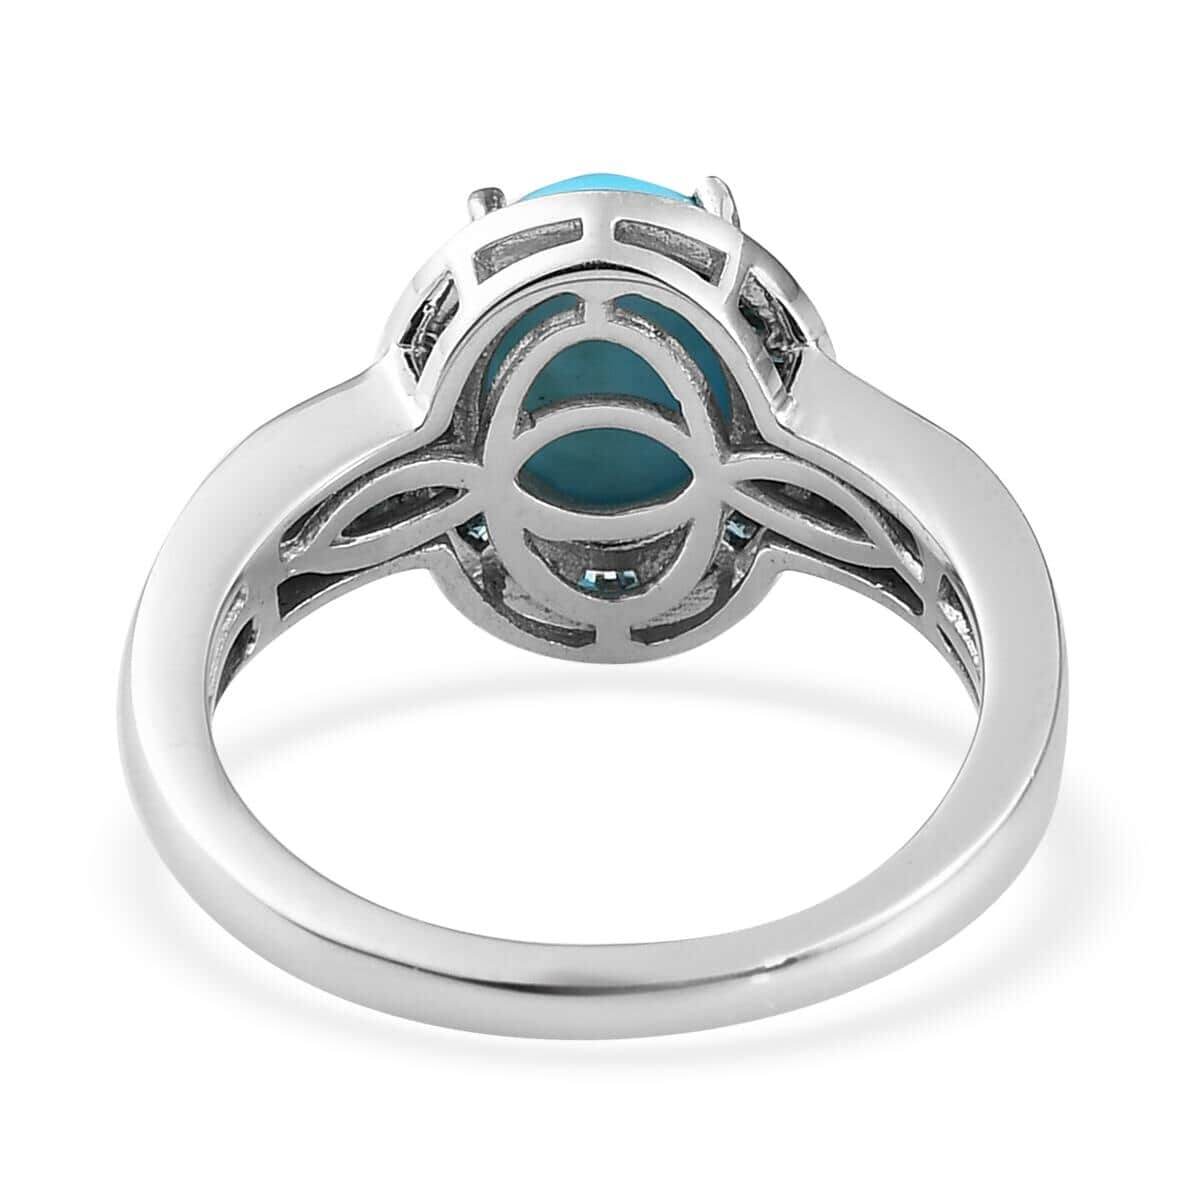 premium-american-natural-sleeping-beauty-turquoise-and-blue-diamond-halo-ring-in-platinum-over-sterling-silver-size-5.0-2.35-ctw image number 4